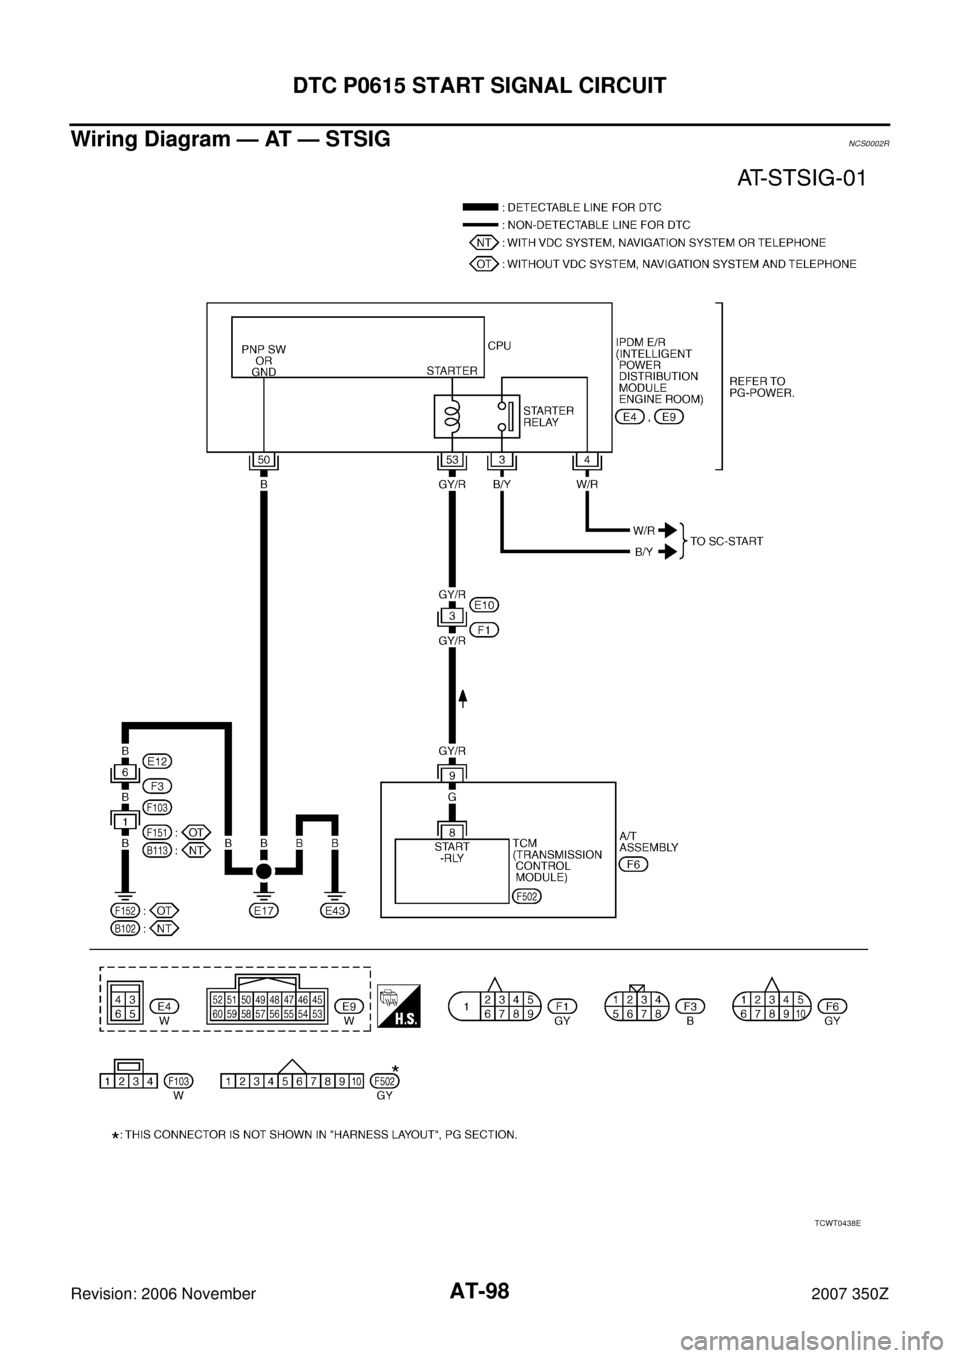 NISSAN 350Z 2007 Z33 Automatic Transmission Owners Manual AT-98
DTC P0615 START SIGNAL CIRCUIT
Revision: 2006 November2007 350Z
Wiring Diagram — AT — STSIGNCS0002R
TCWT0438E 